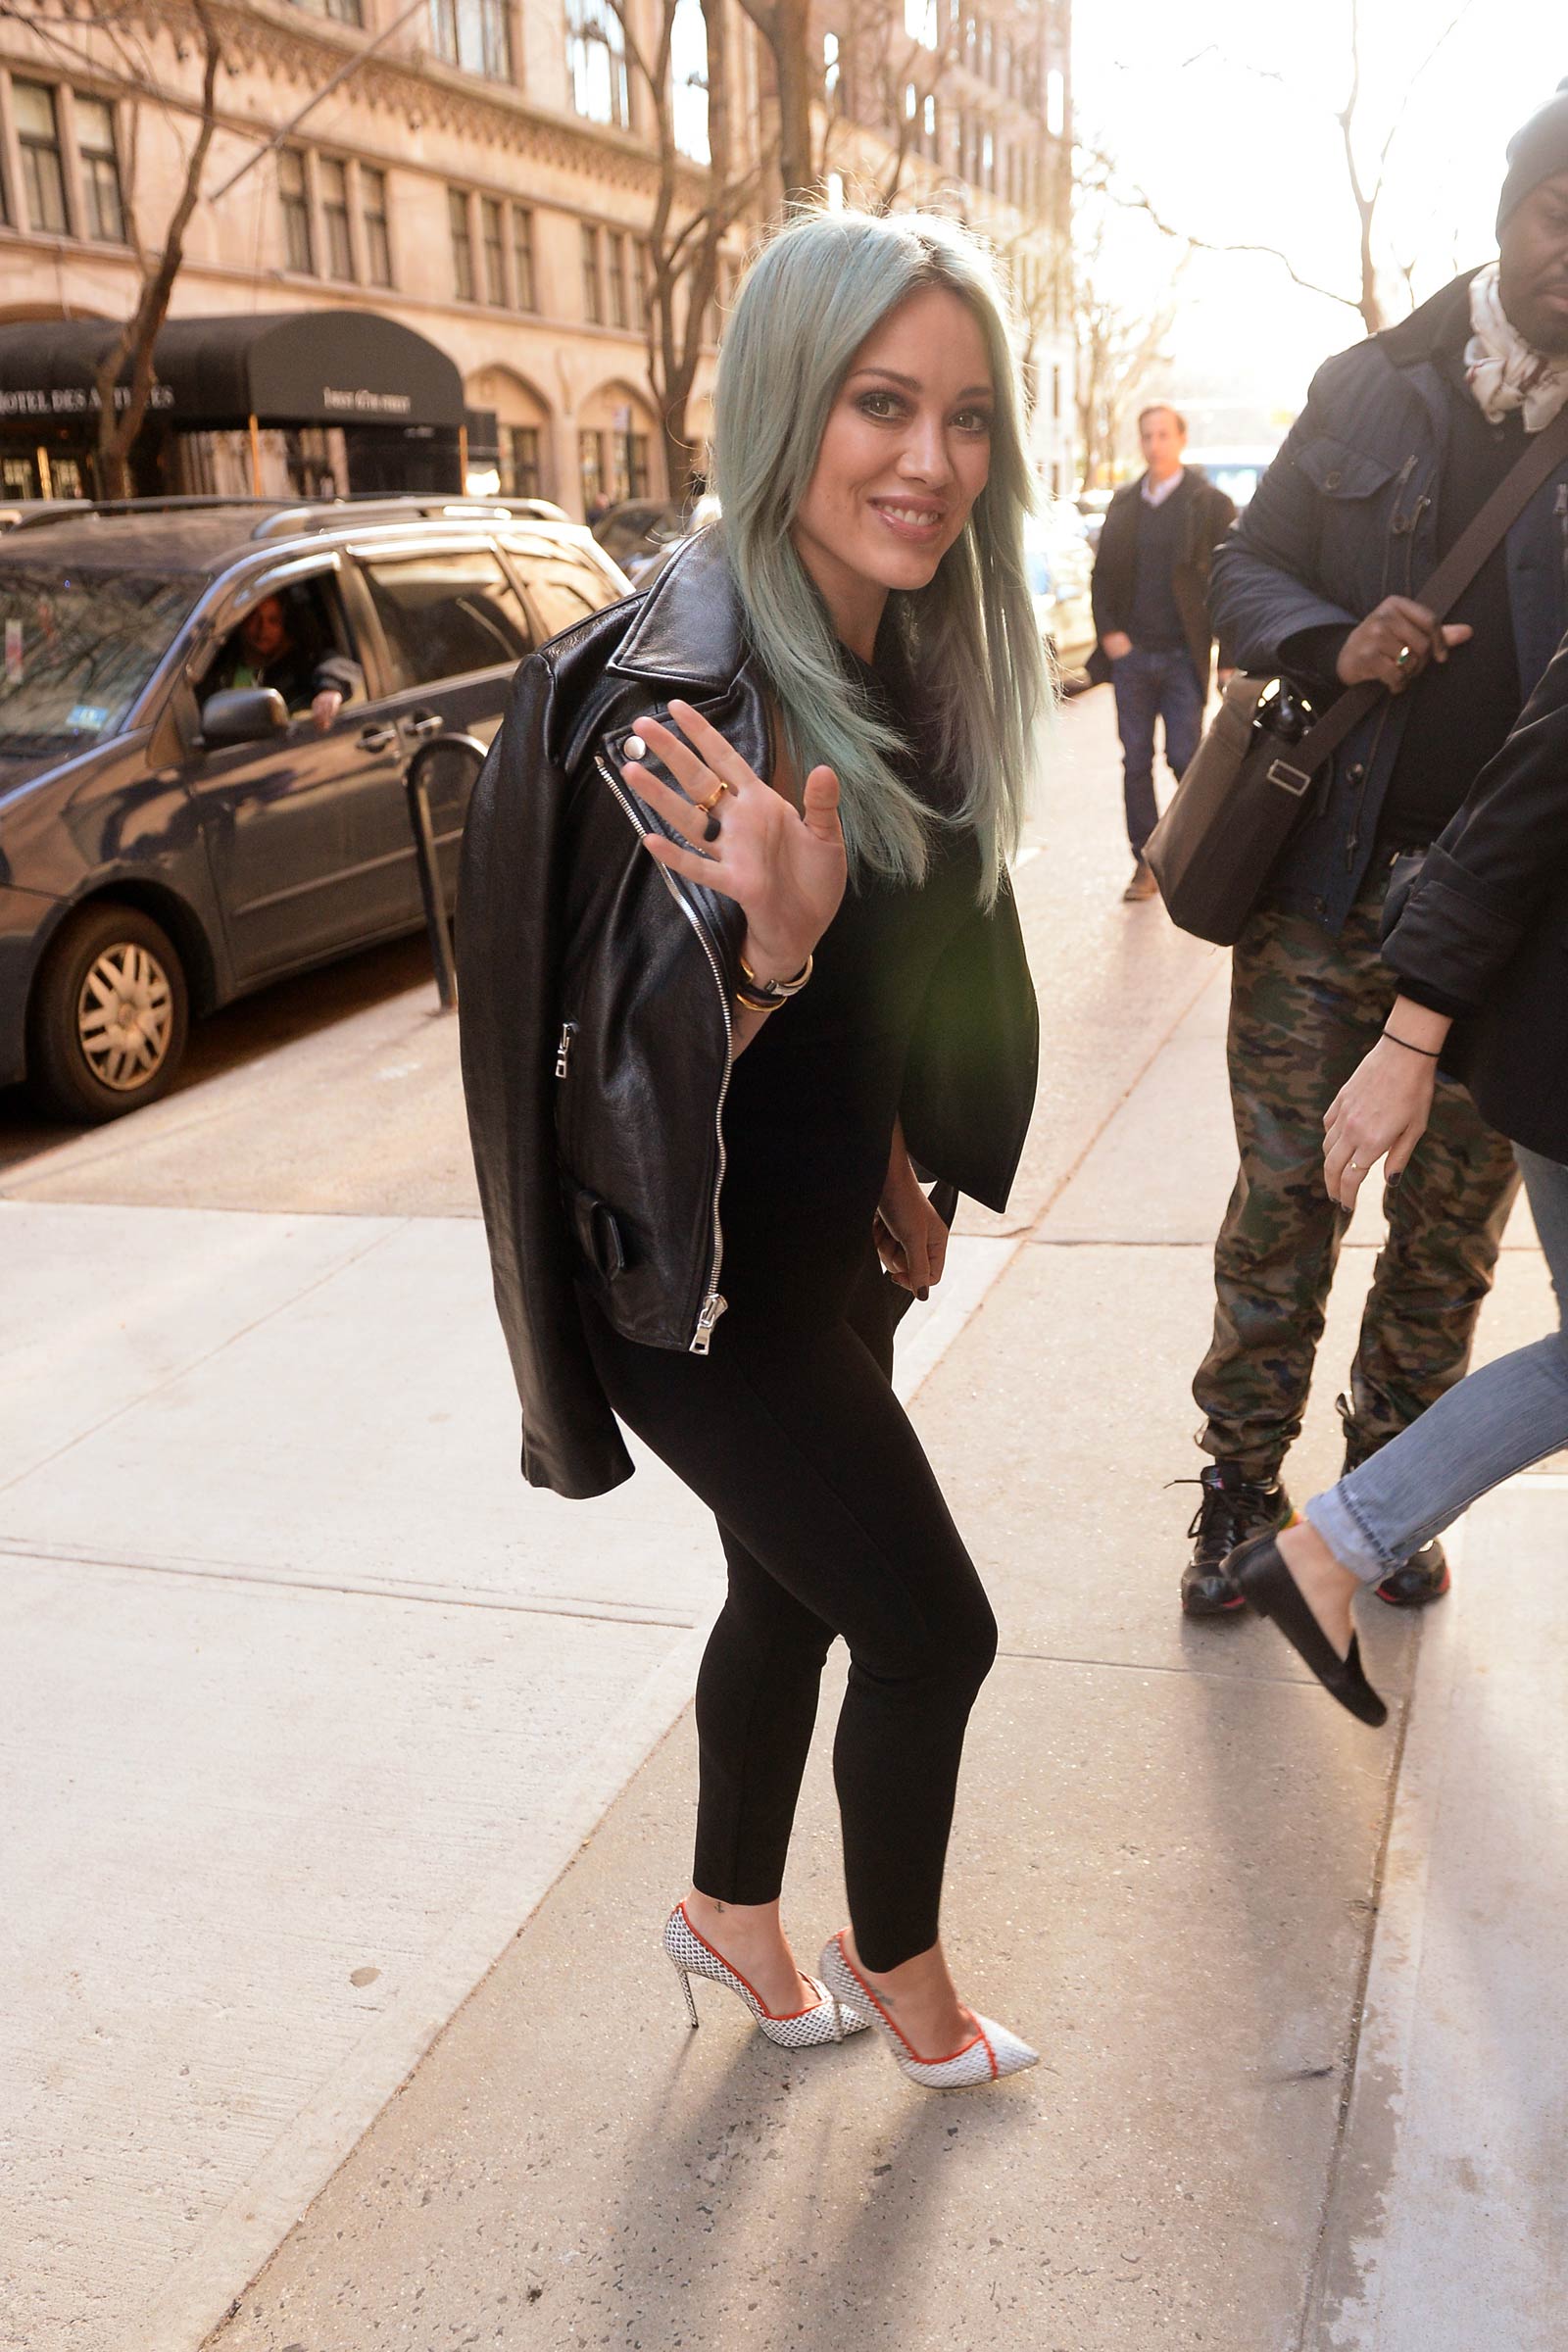 Hilary Duff arriving at The Chew in NYC